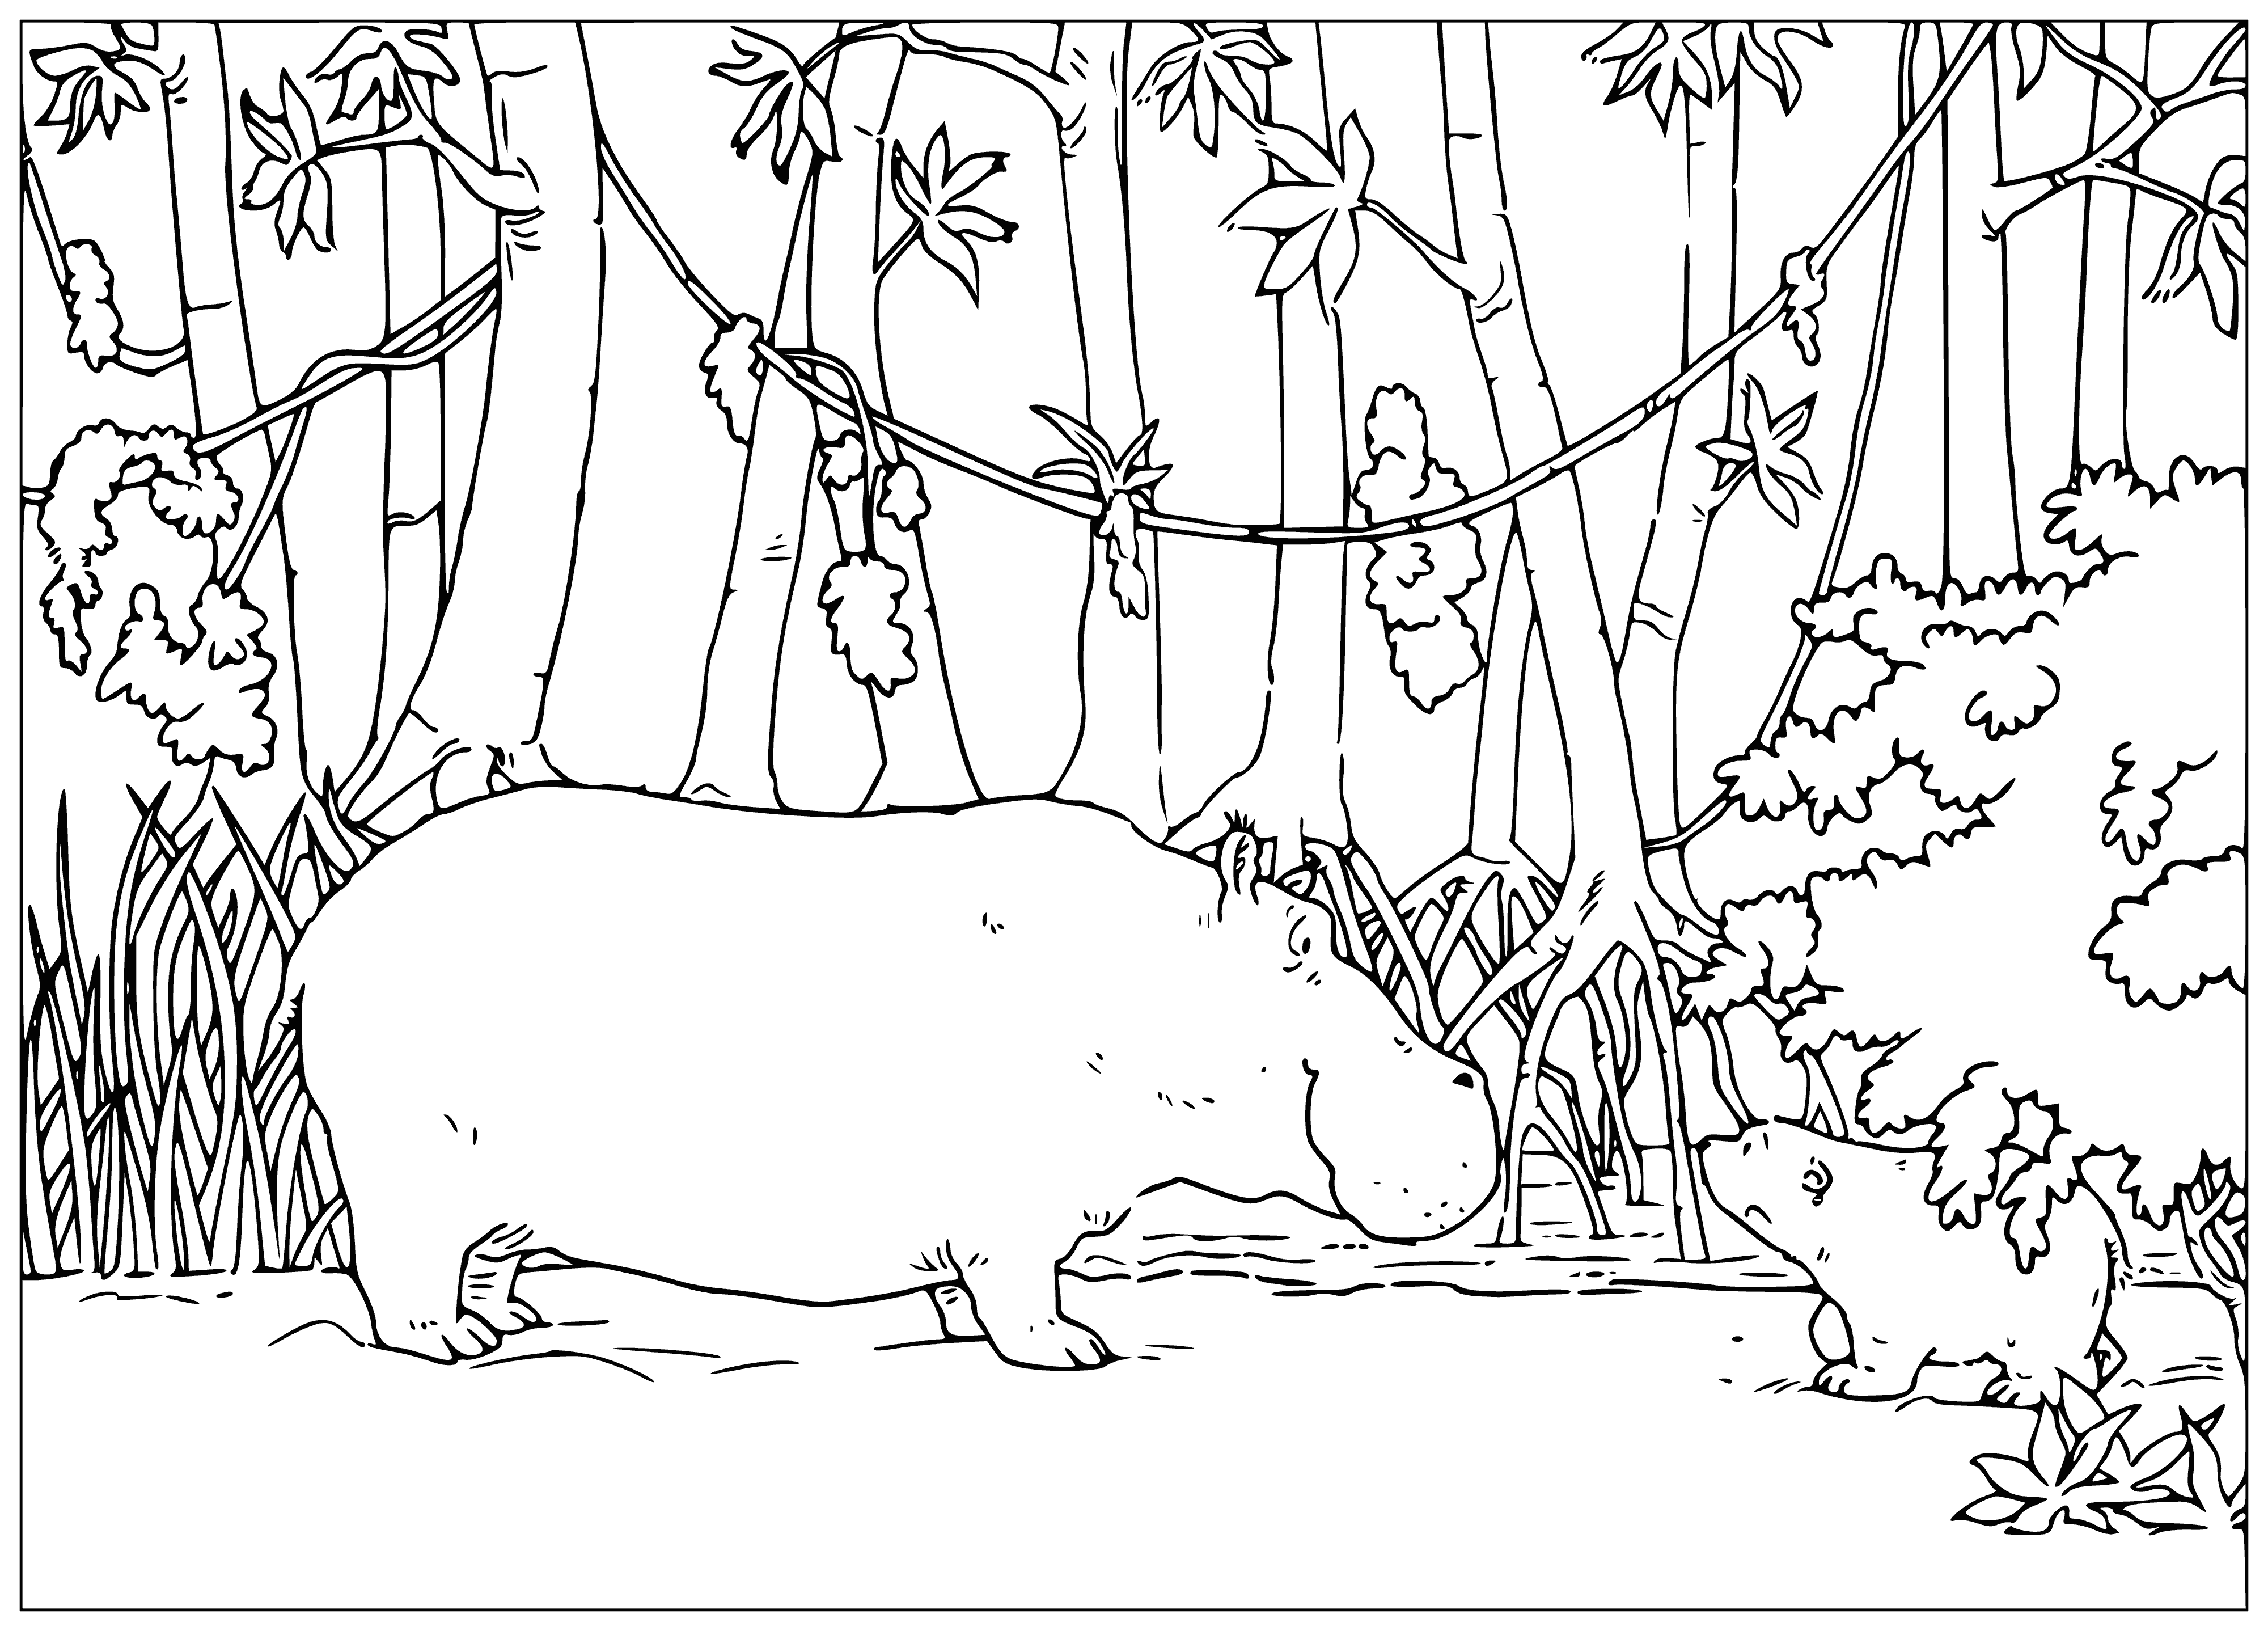 coloring page: Polar bear floats with a pink/purple fish; looks at hippo who sits, mouth open, looking back.